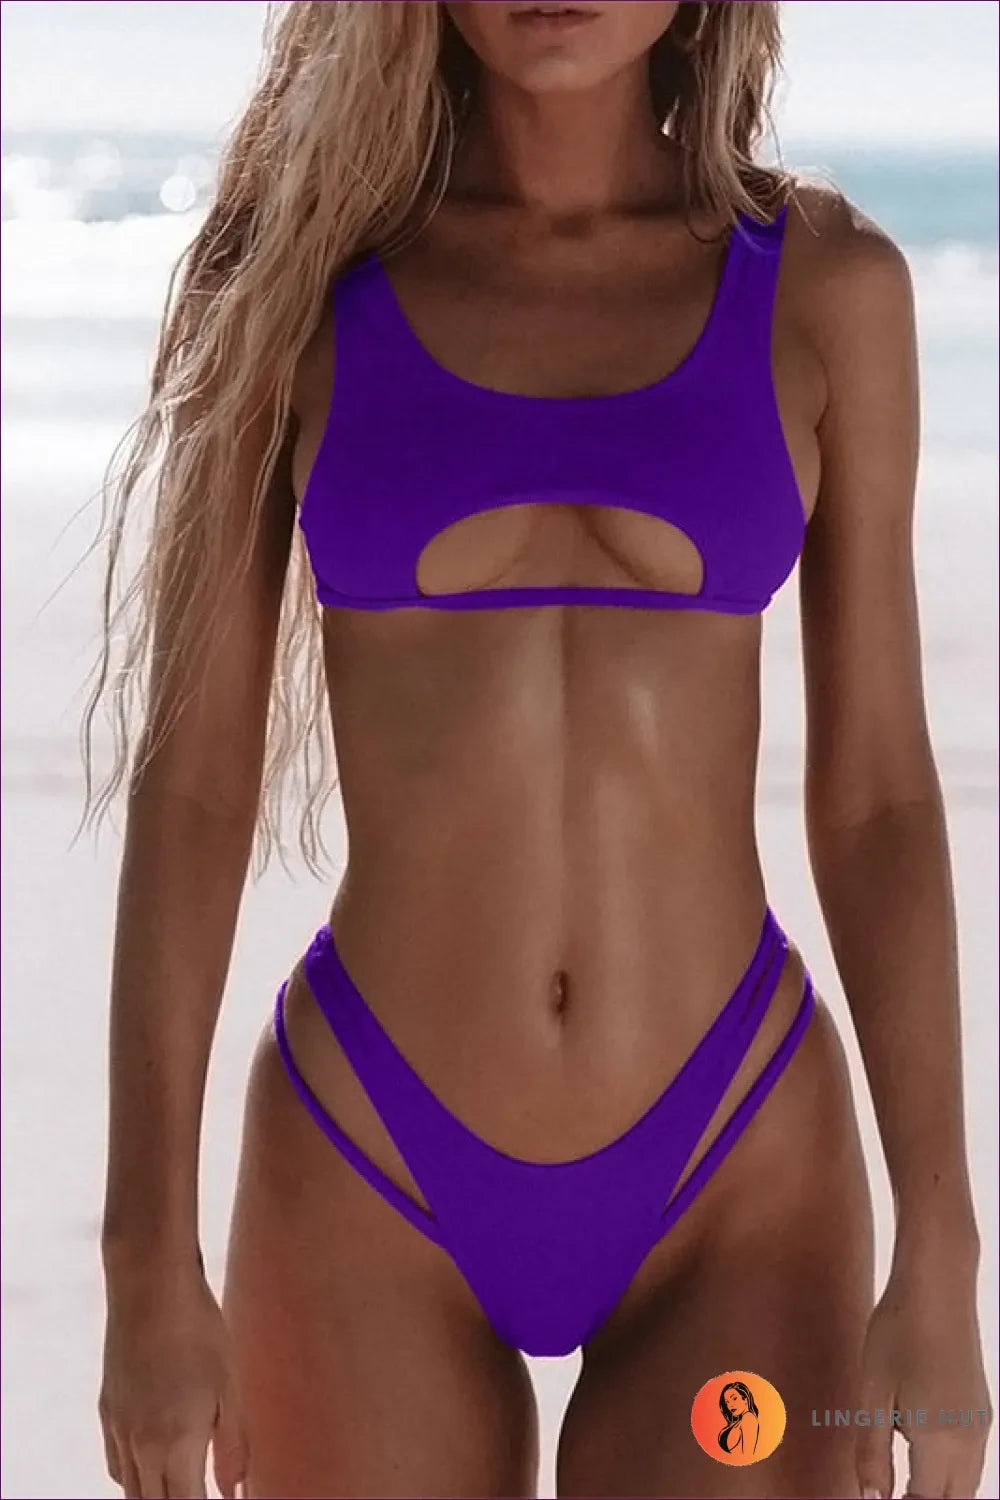 Stun On The Beach With Our Low Waist Back Closure Cut Out Bikini. Elegance, Style, And Confidence Combined.